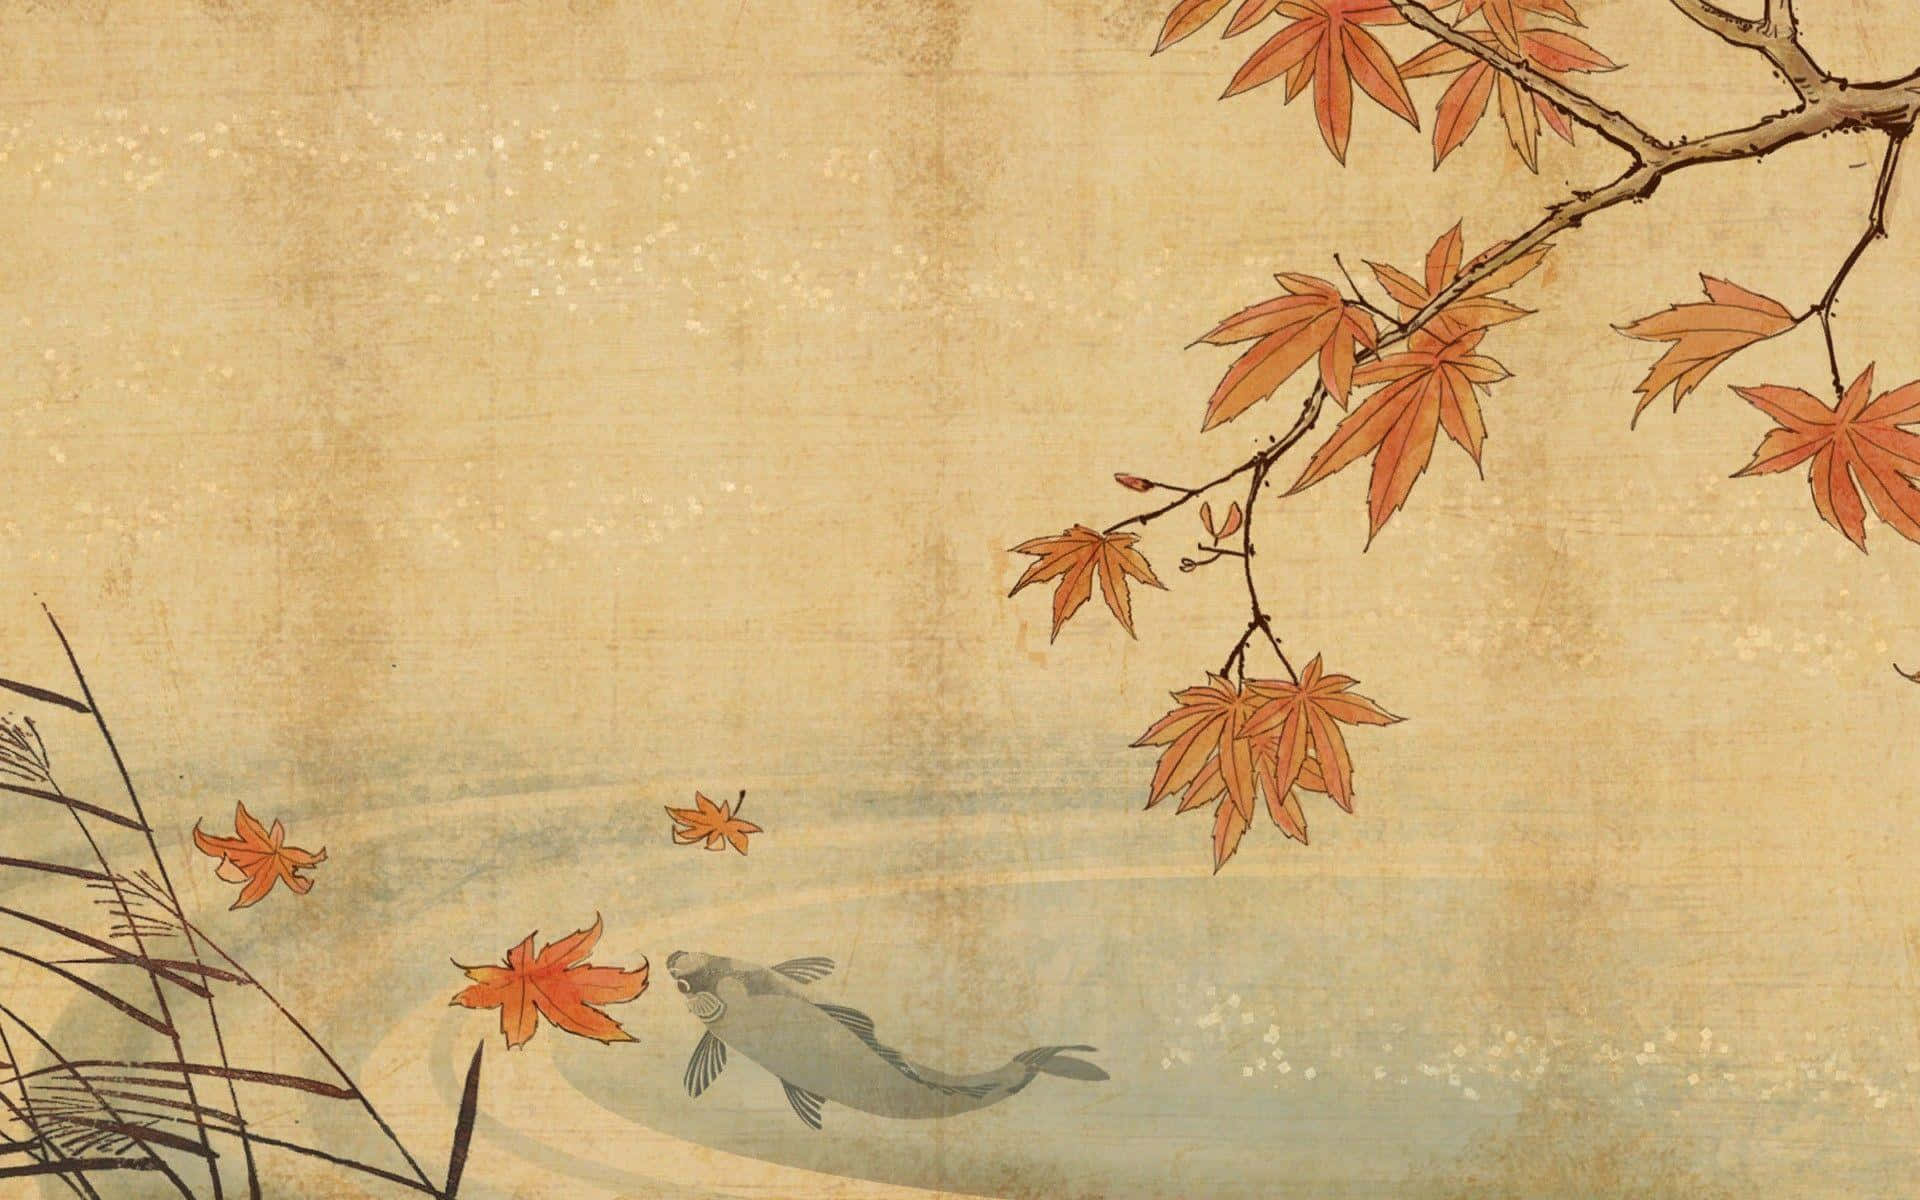 A Painting Of A Koi Fish In A Pond